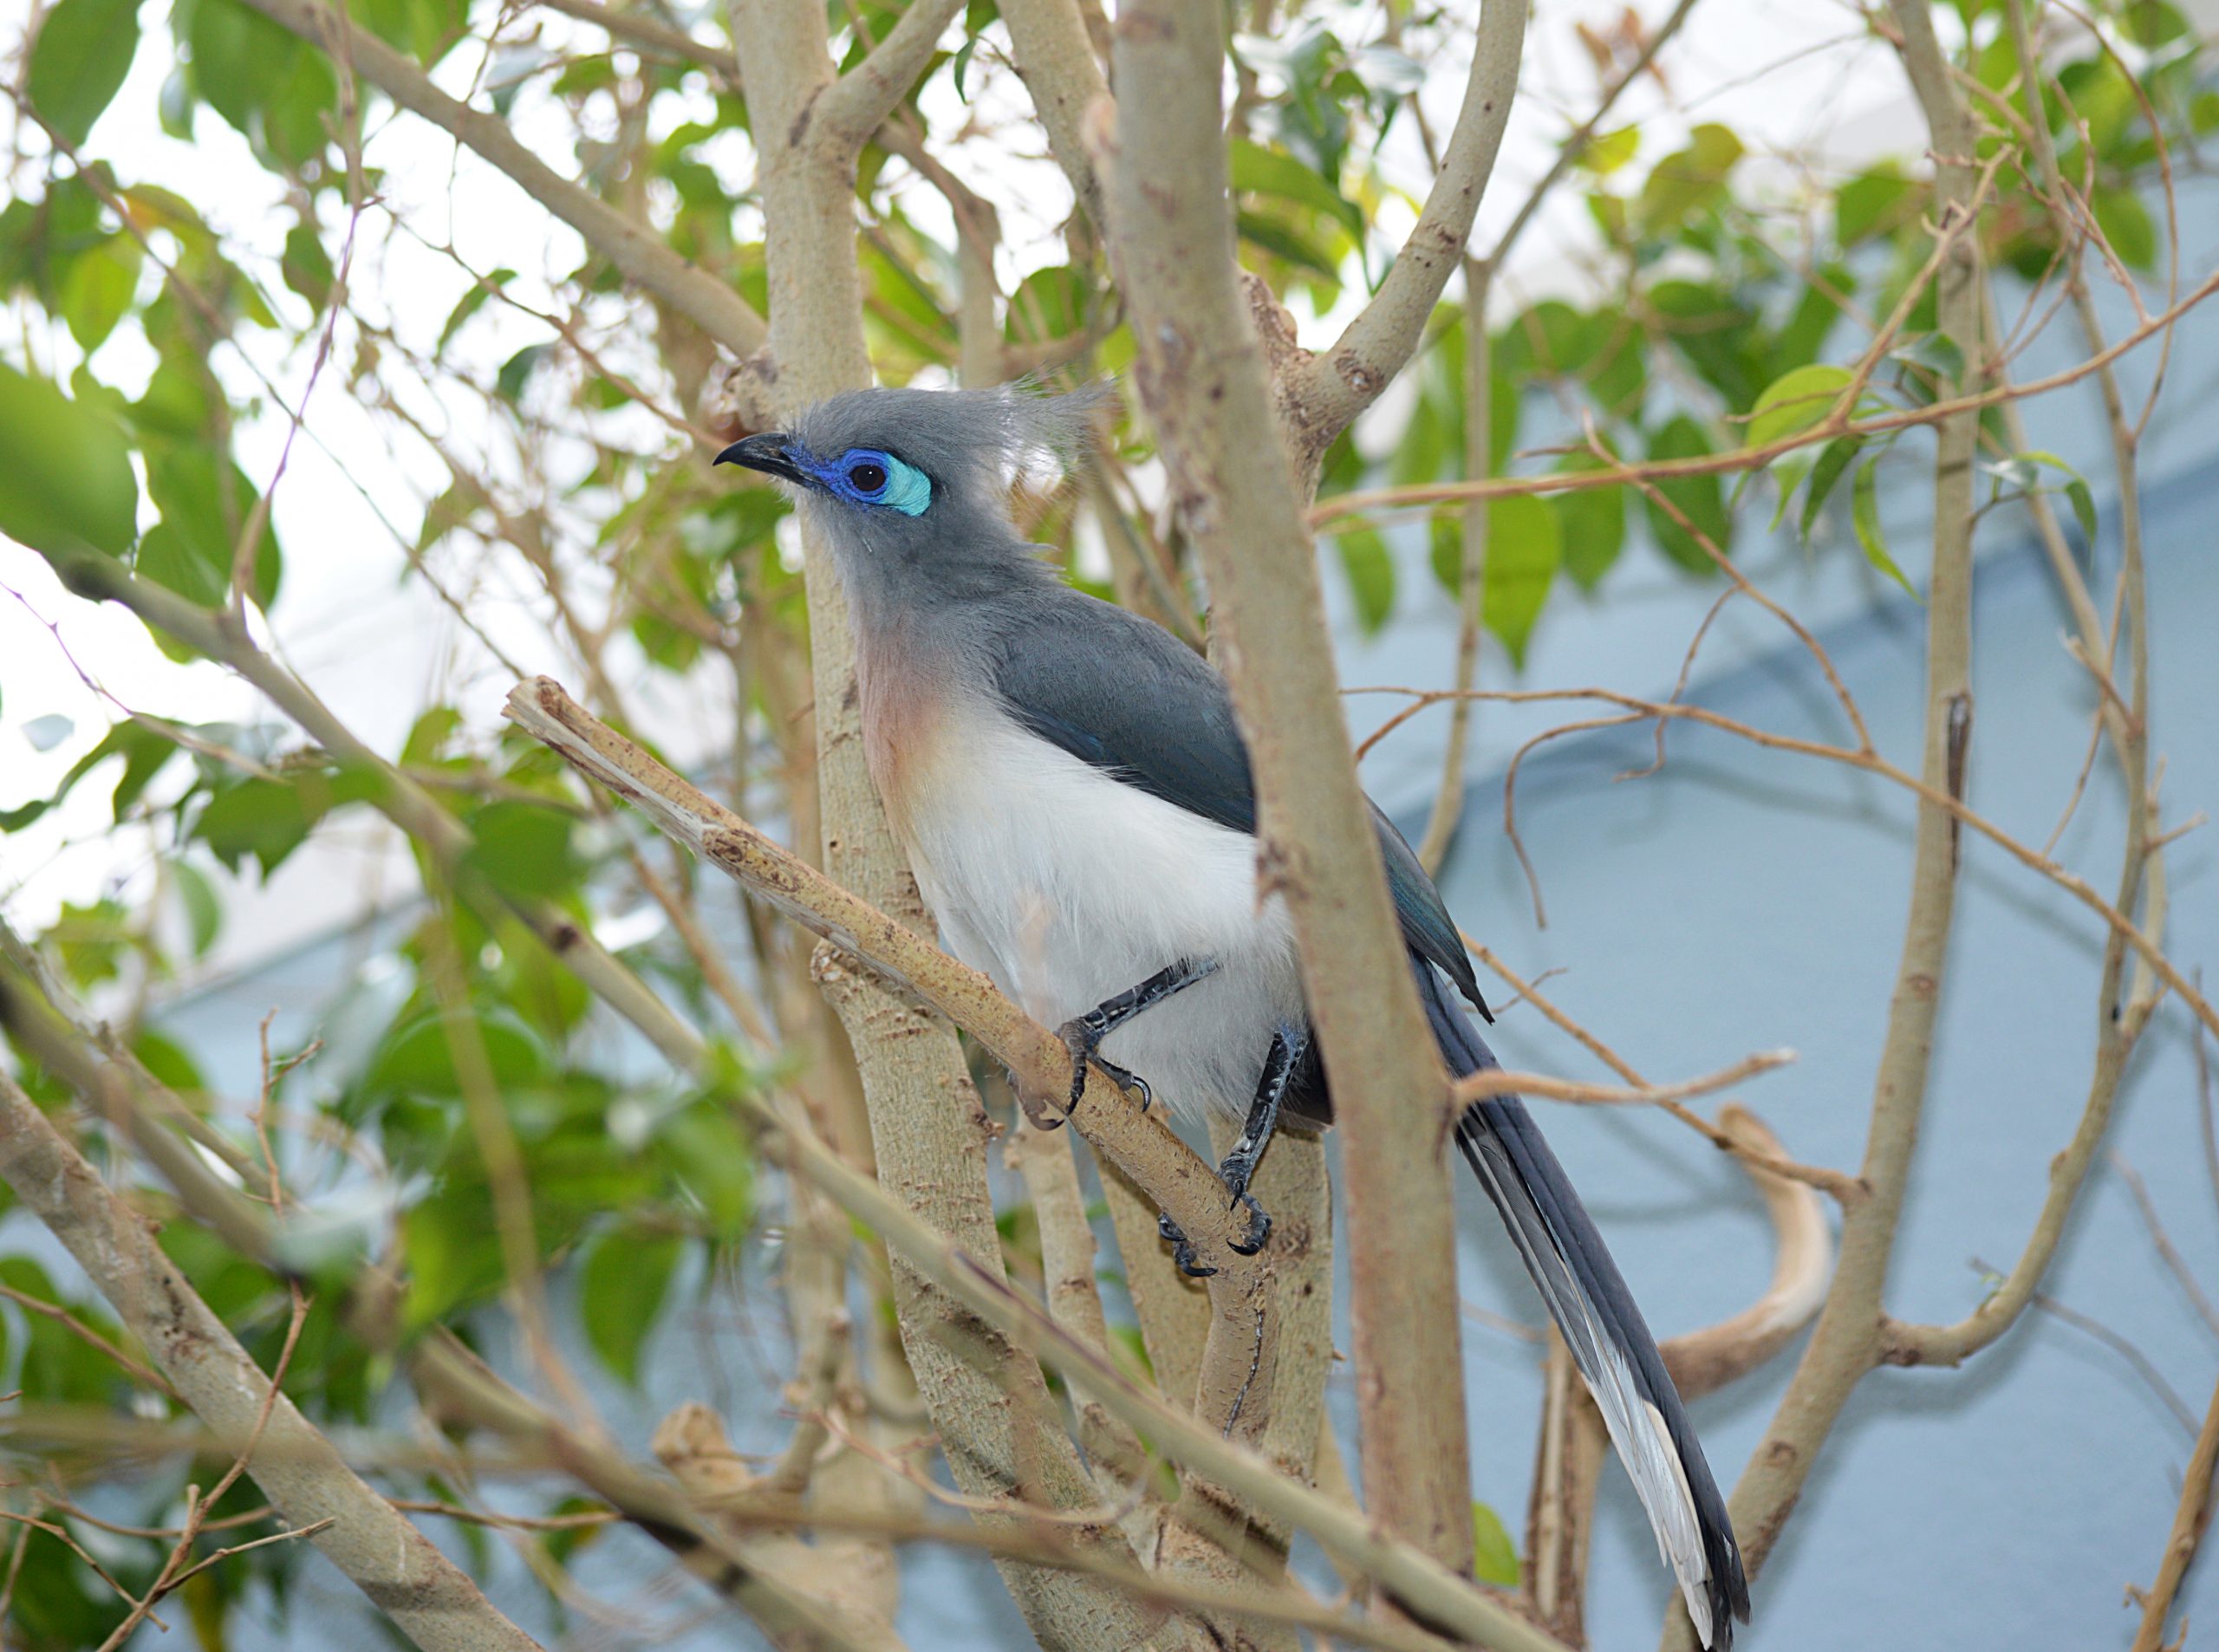 A Crested Coua perched on a branch